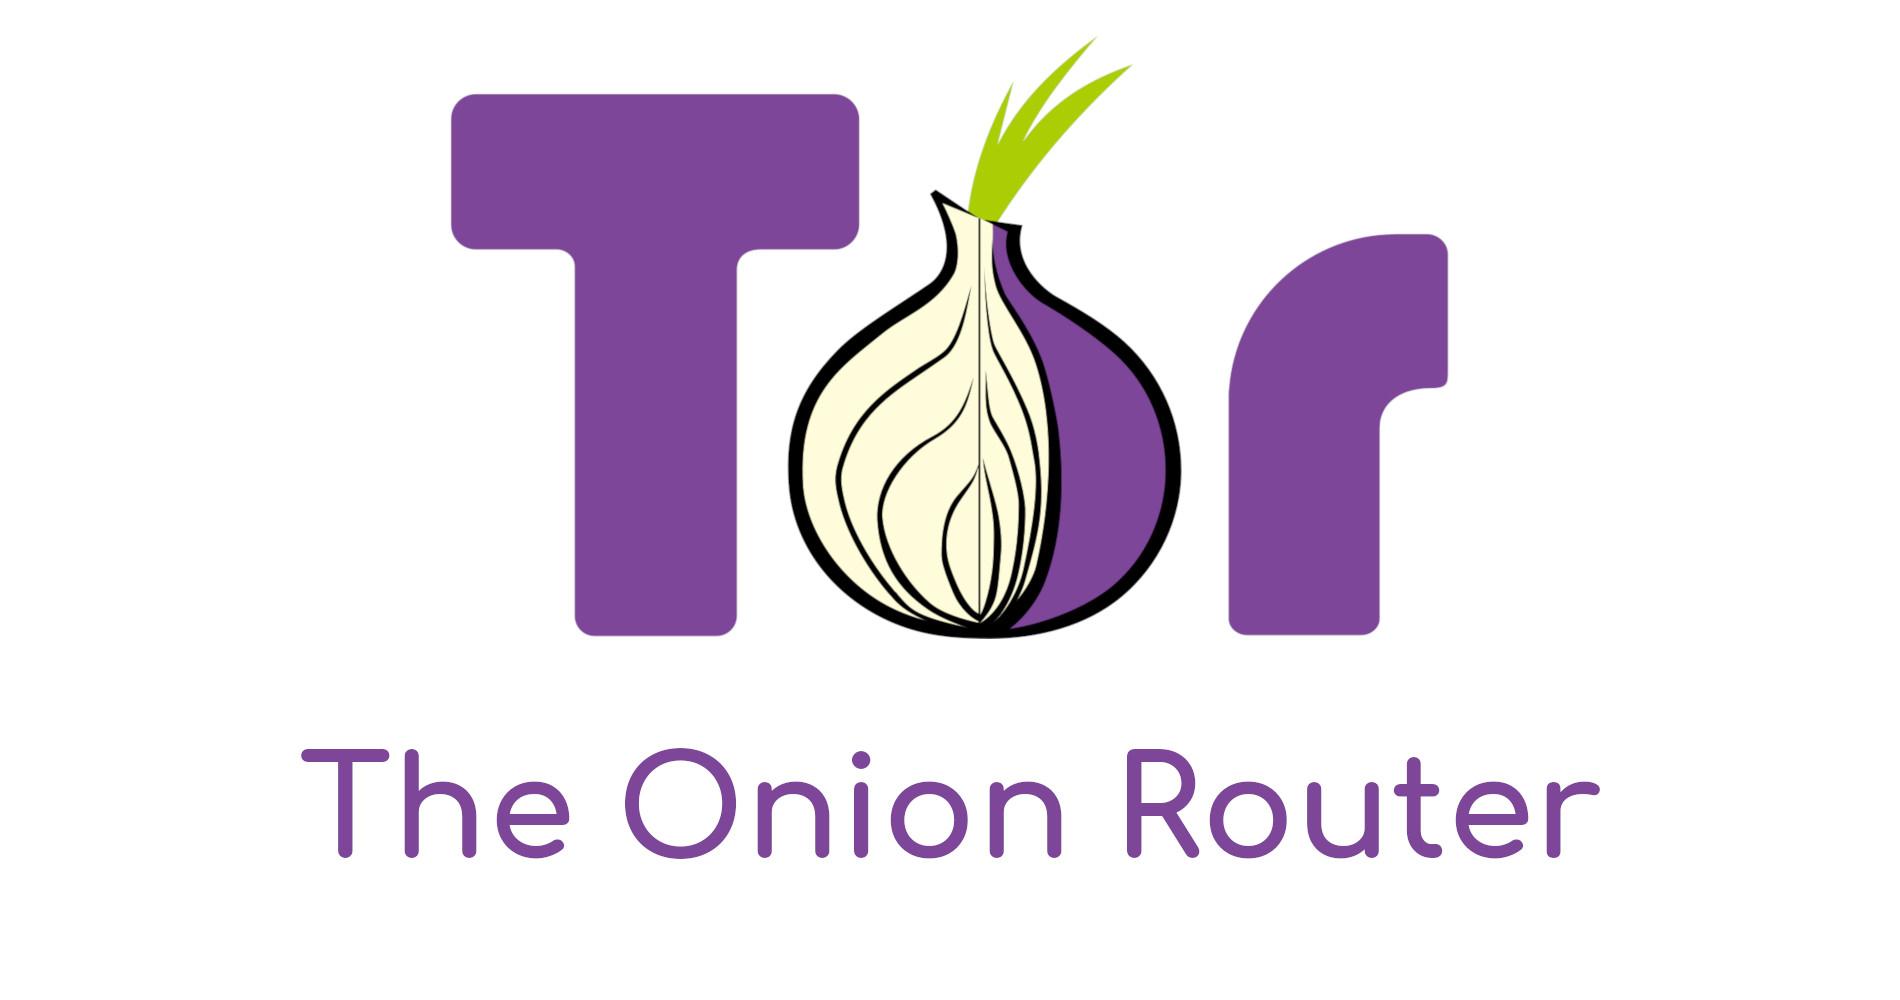 What is onion router and how does it work?